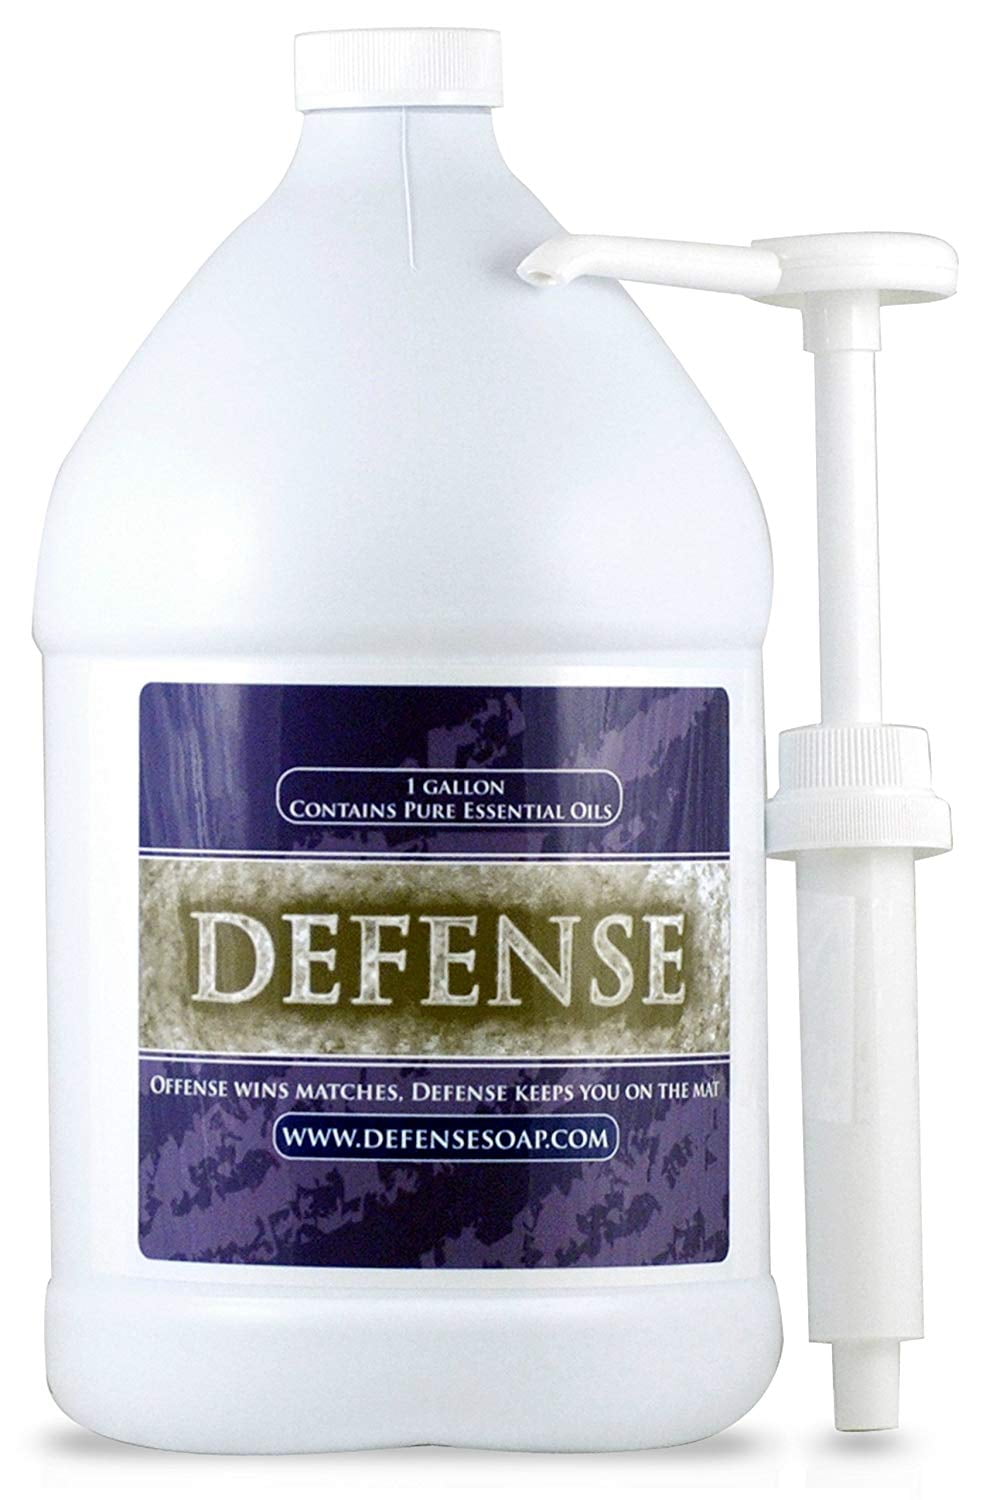 Defense Soap Body Wash Shower Gel 1 Gallon (128 fl oz) | 100% Natural Tea  Tree Oil and Eucalyptus Oil Helps Wash Away Ringworm, Jock Itch, Psoriasis,  